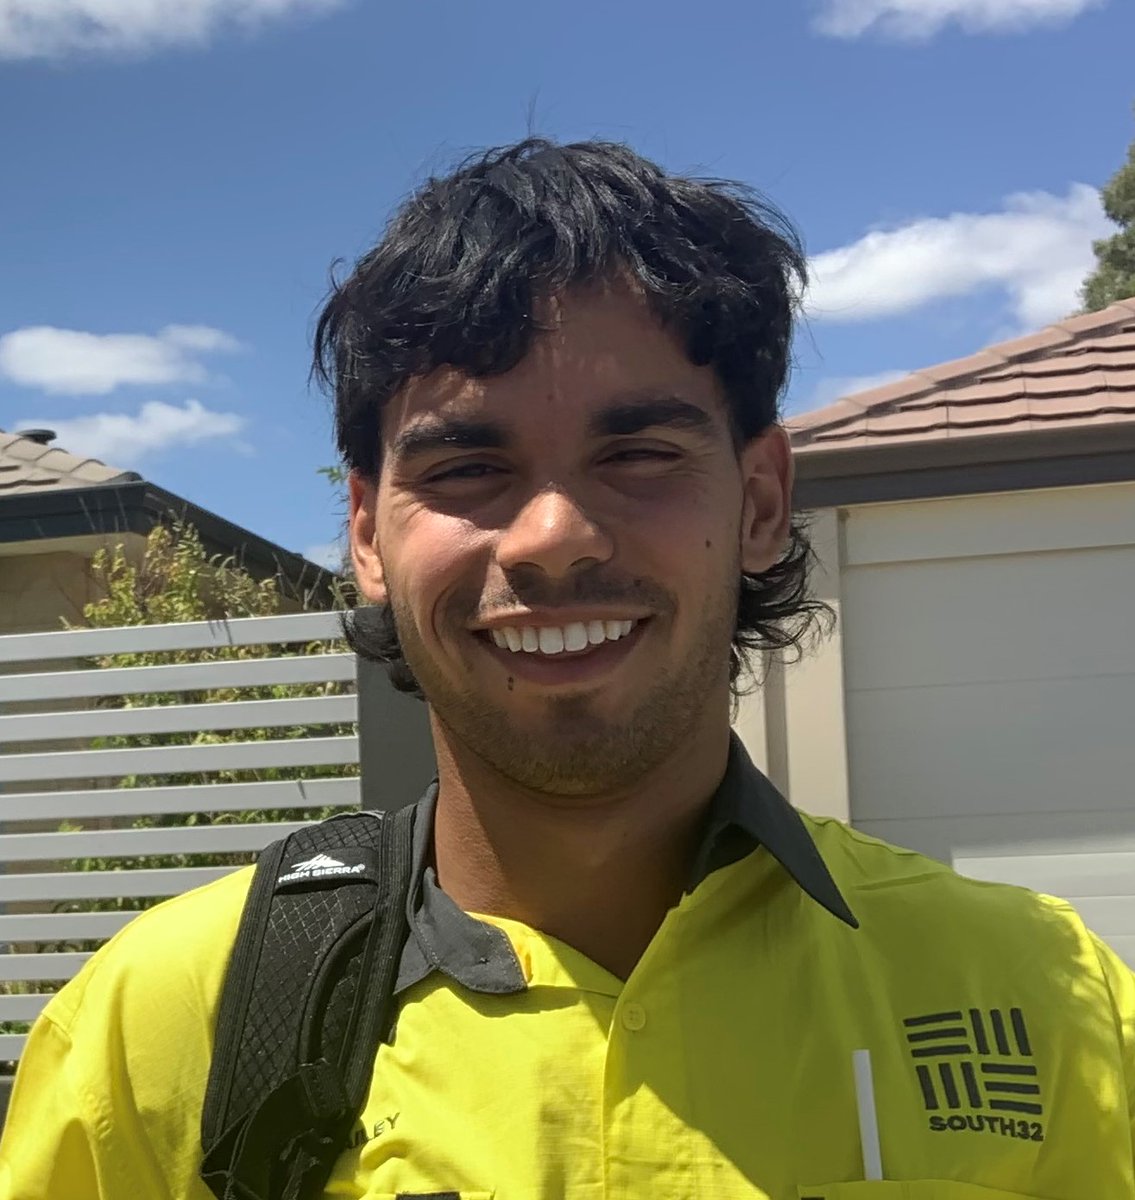 We're pleased to share that one of our MADALAH Indigenous tertiary scholarship recipients, Flynn Bailey, has just become a South32 employee. Flynn is studying engineering at the University of Western Australia and will work with us part-time. Welcome to South32, Flynn!